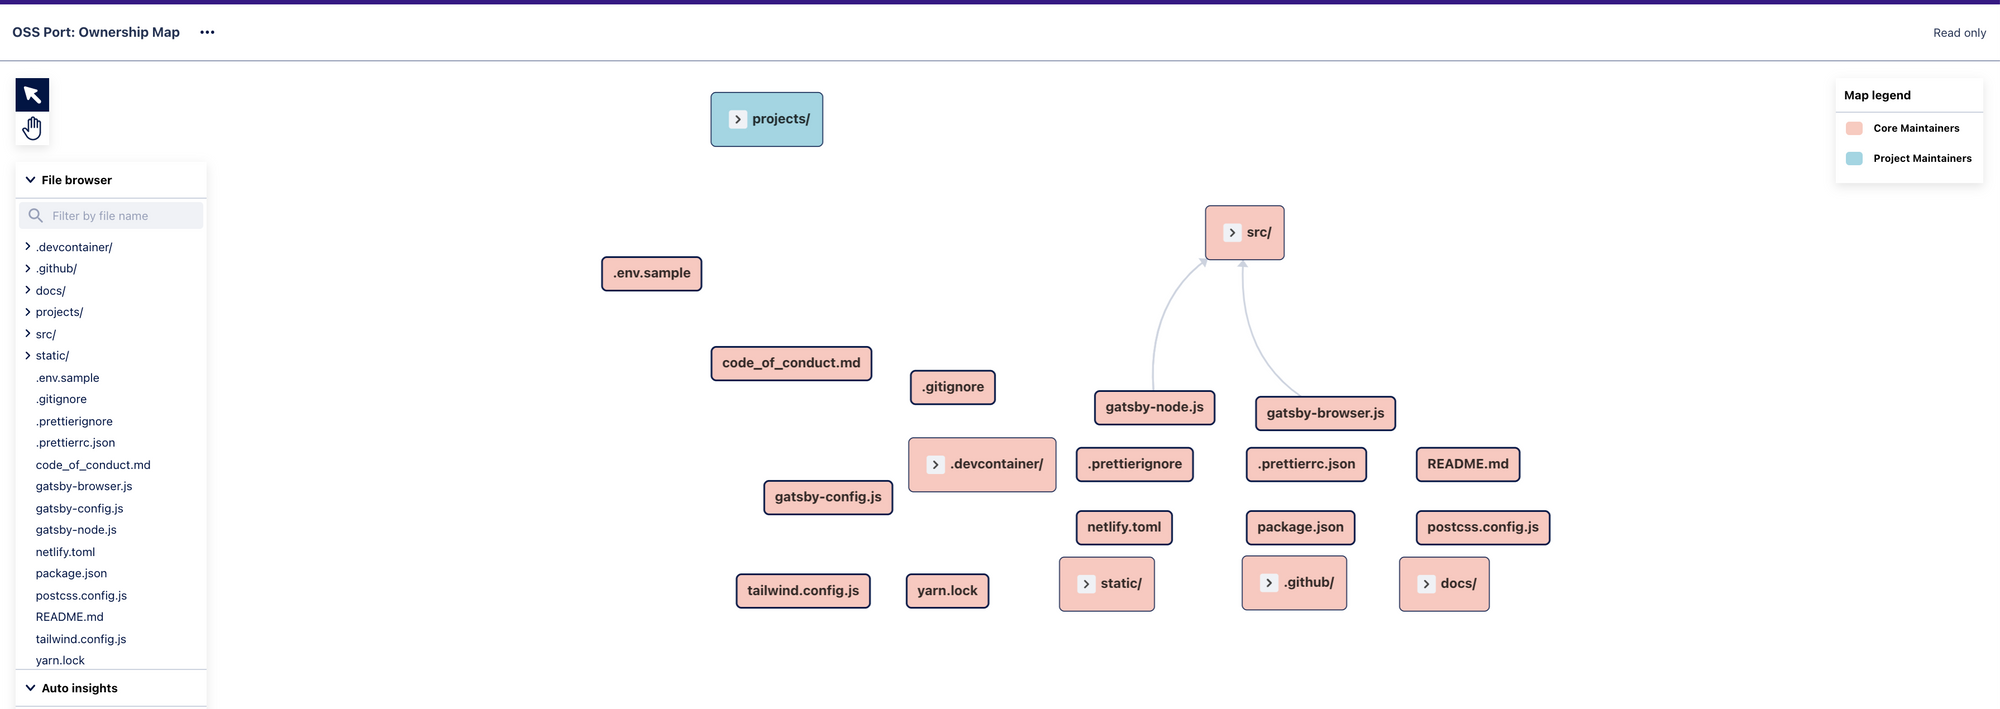 CodeSee Ownership Map Example